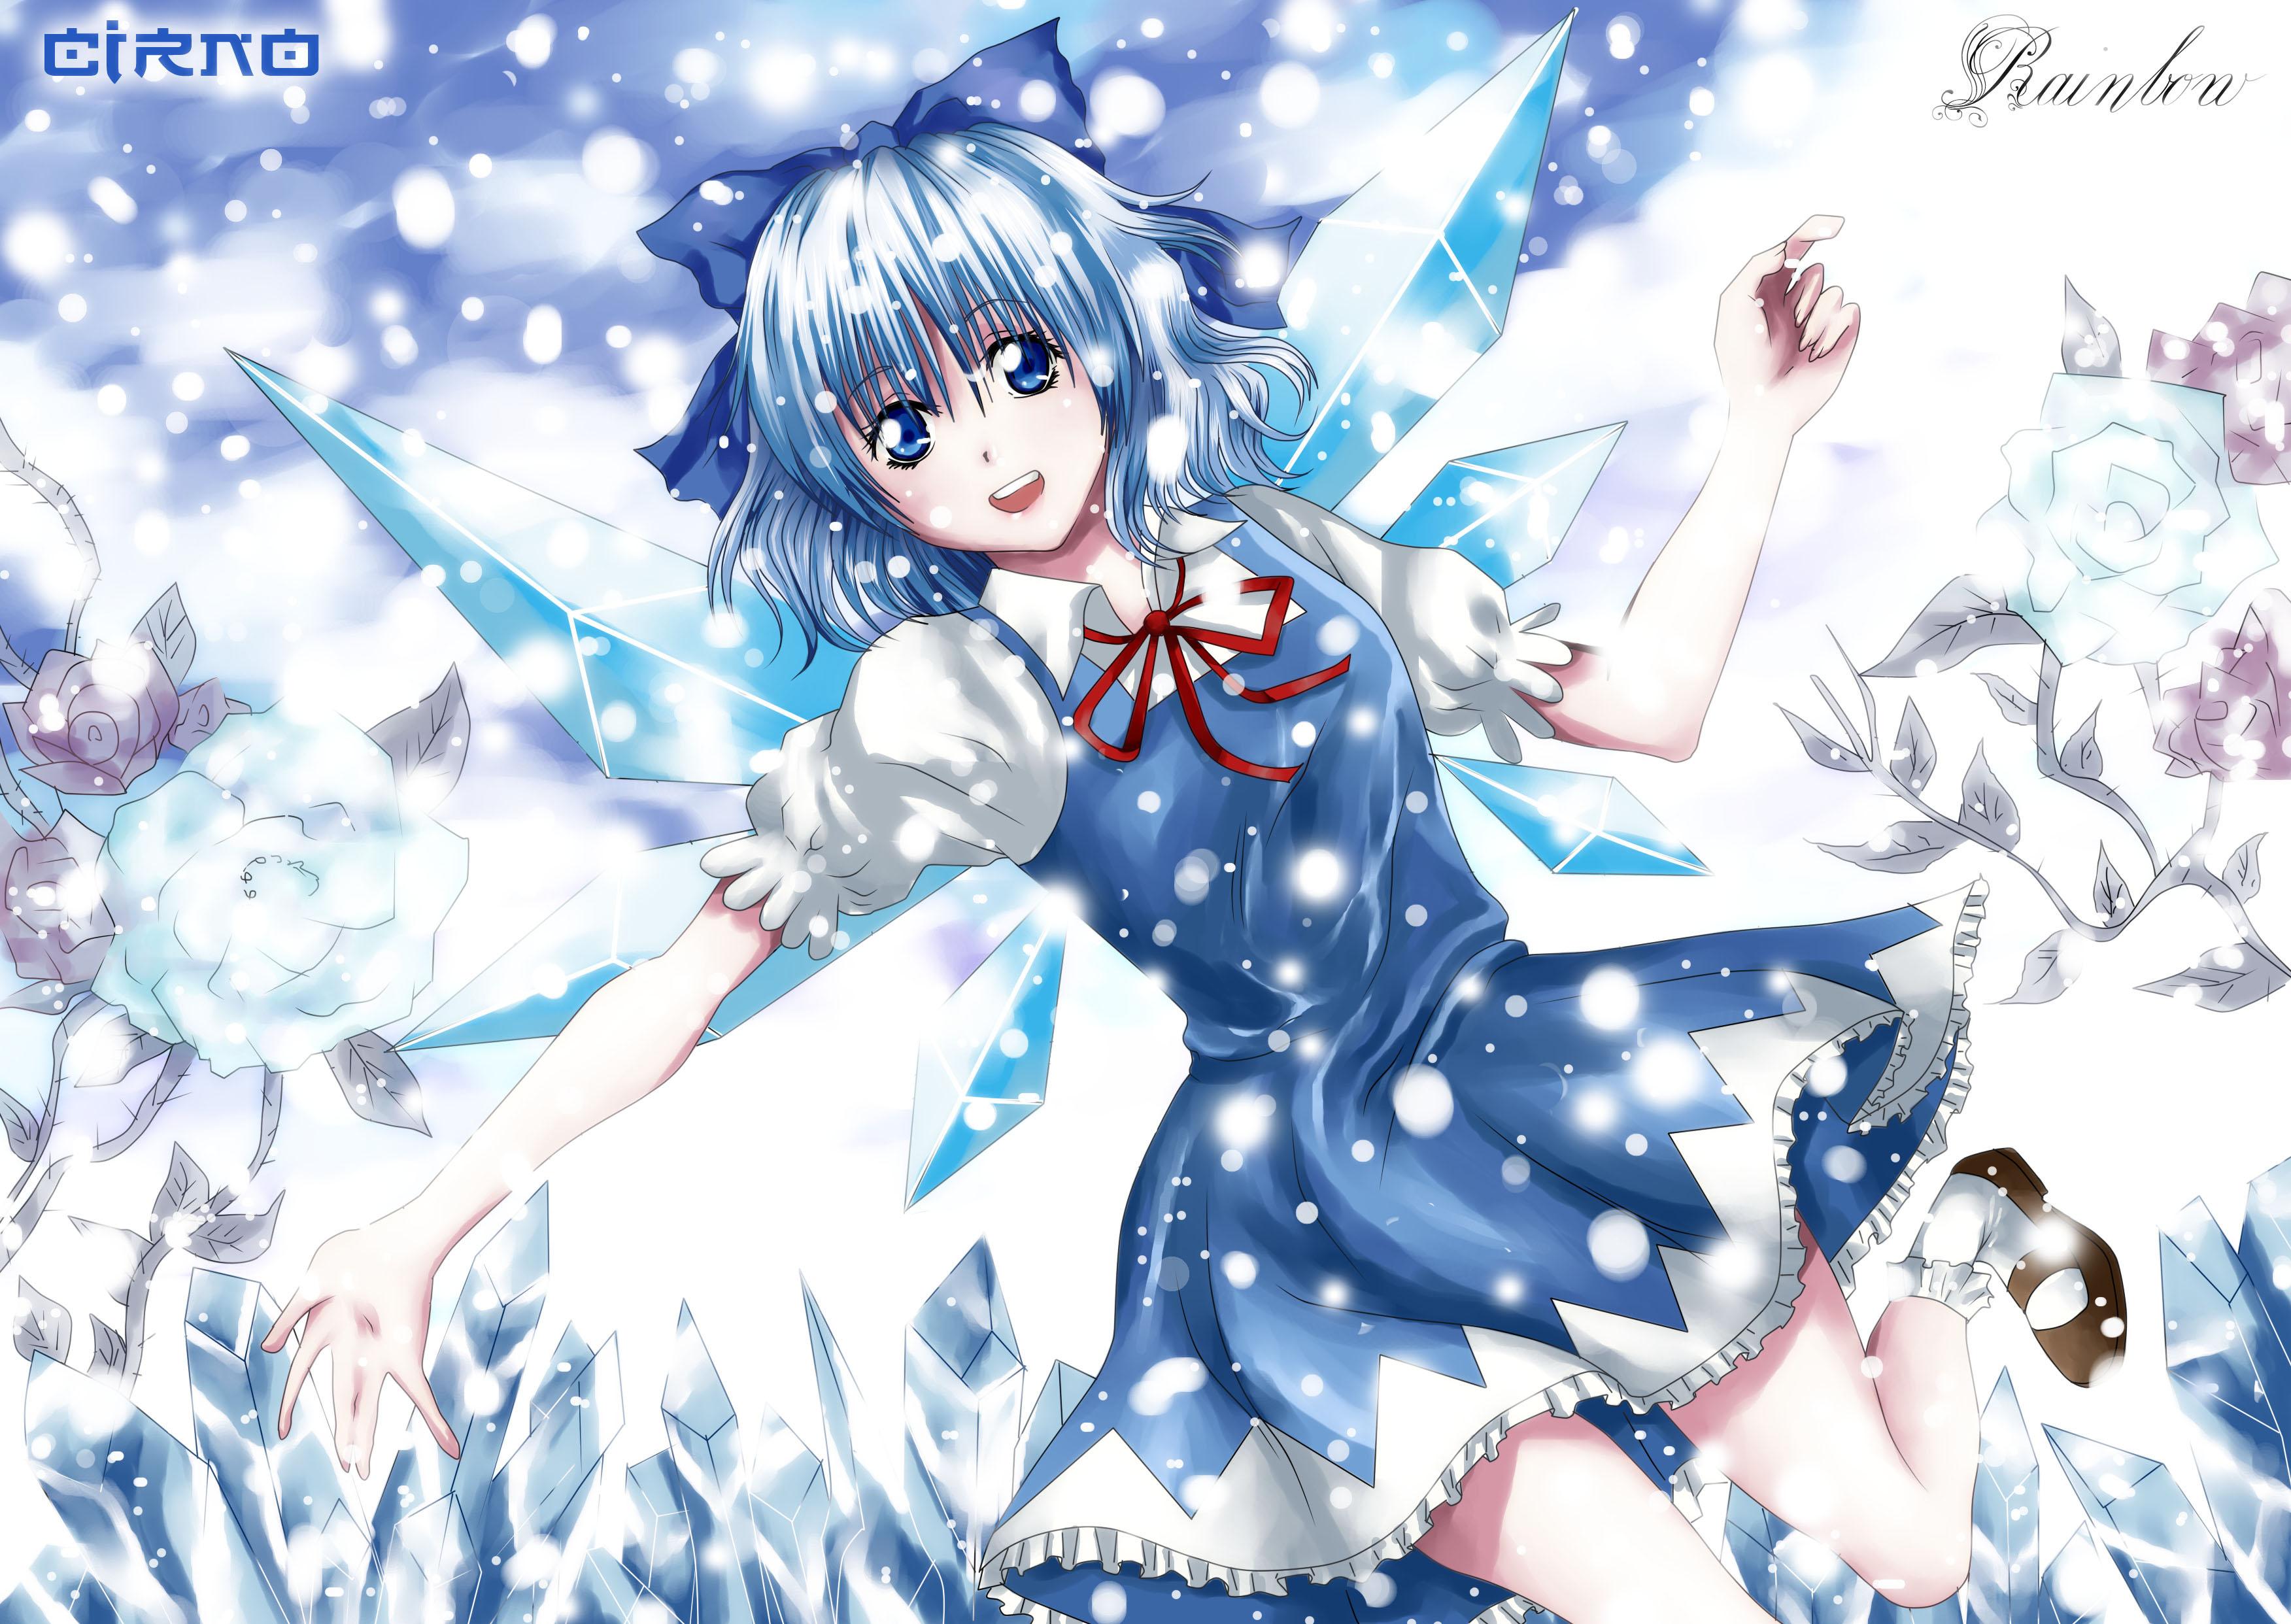 Cirno - (#88019) - High Quality and Resolution Wallpapers on ...